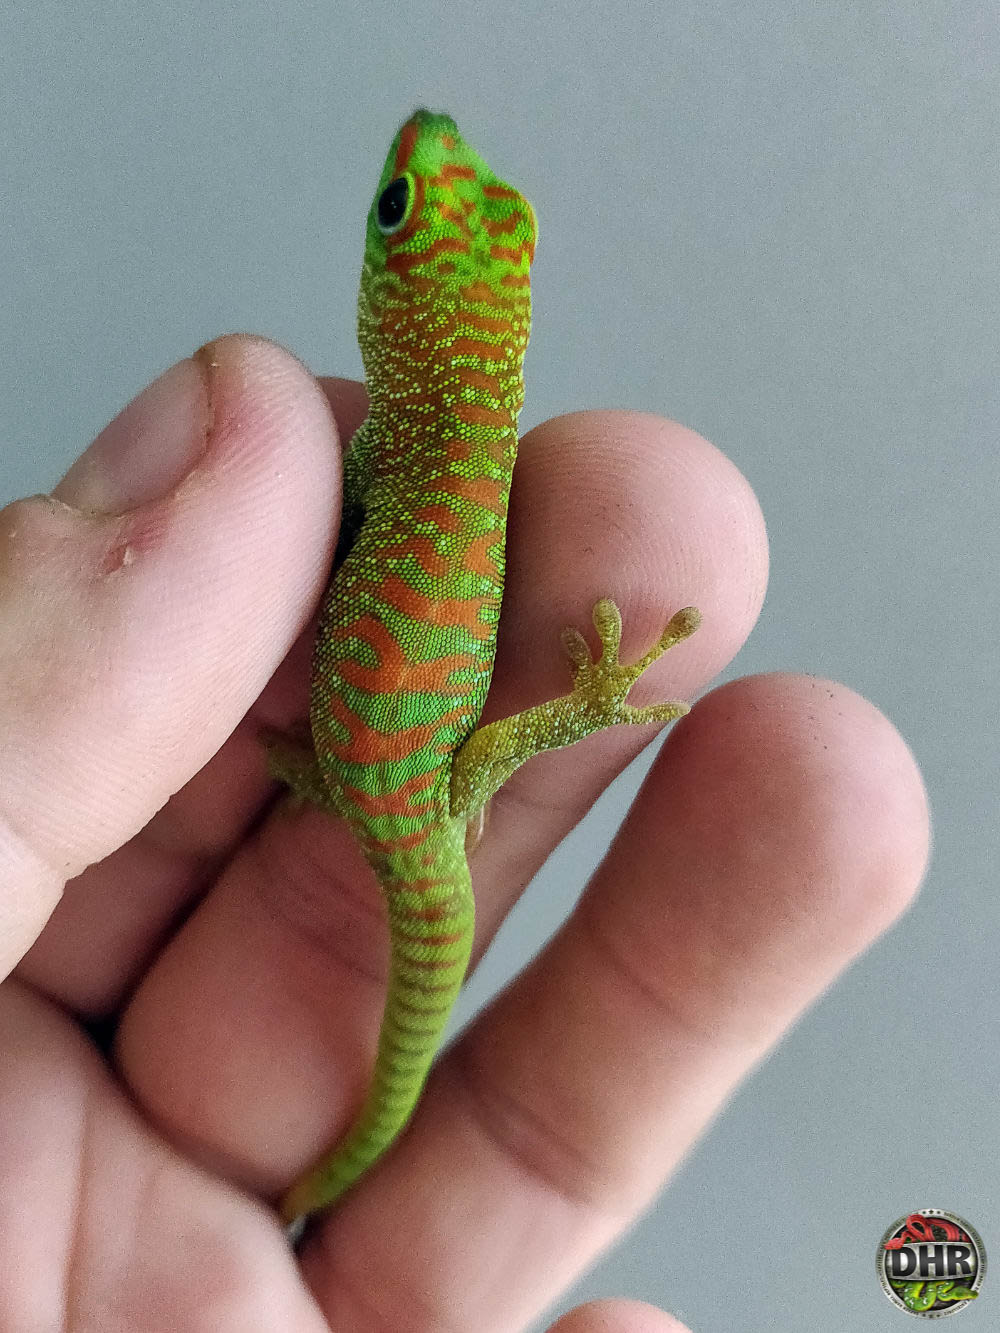 Giant Day Geckos are posted